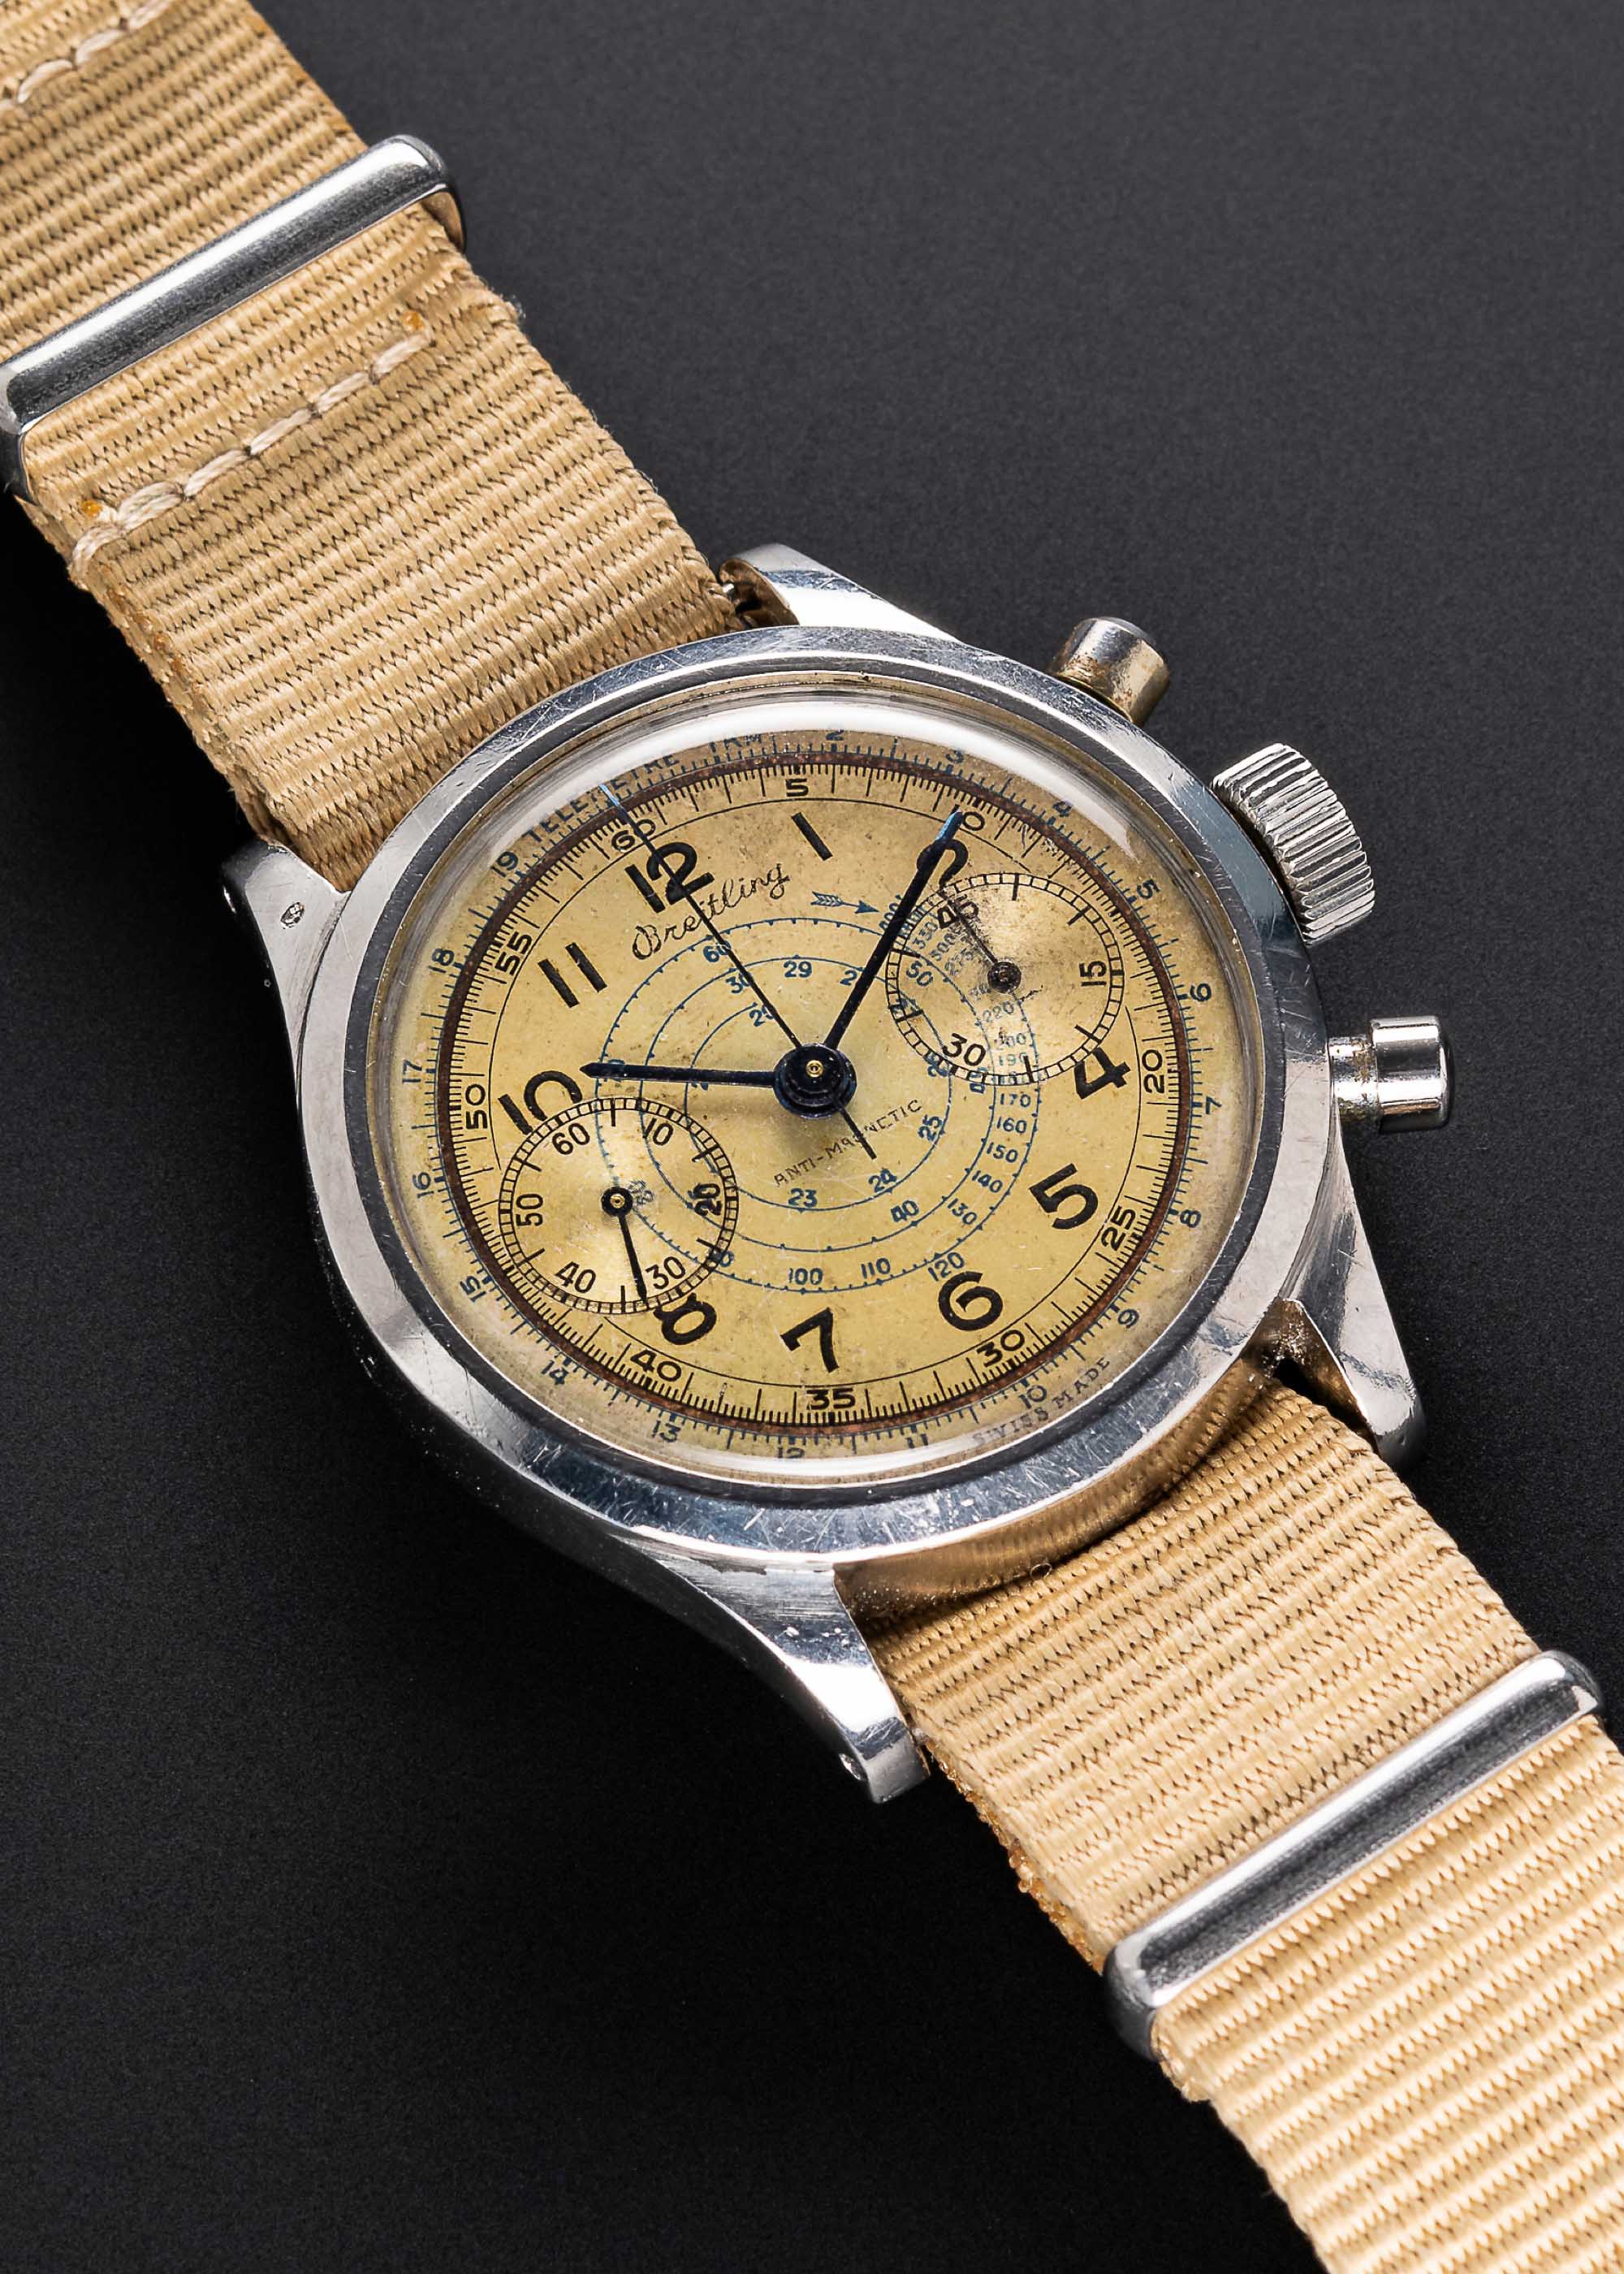 A RARE GENTLEMAN'S STAINLESS STEEL BREITLING ANTIMAGNETIC WATERPROOF "CLAMSHELL" CHRONOGRAPH WRIST